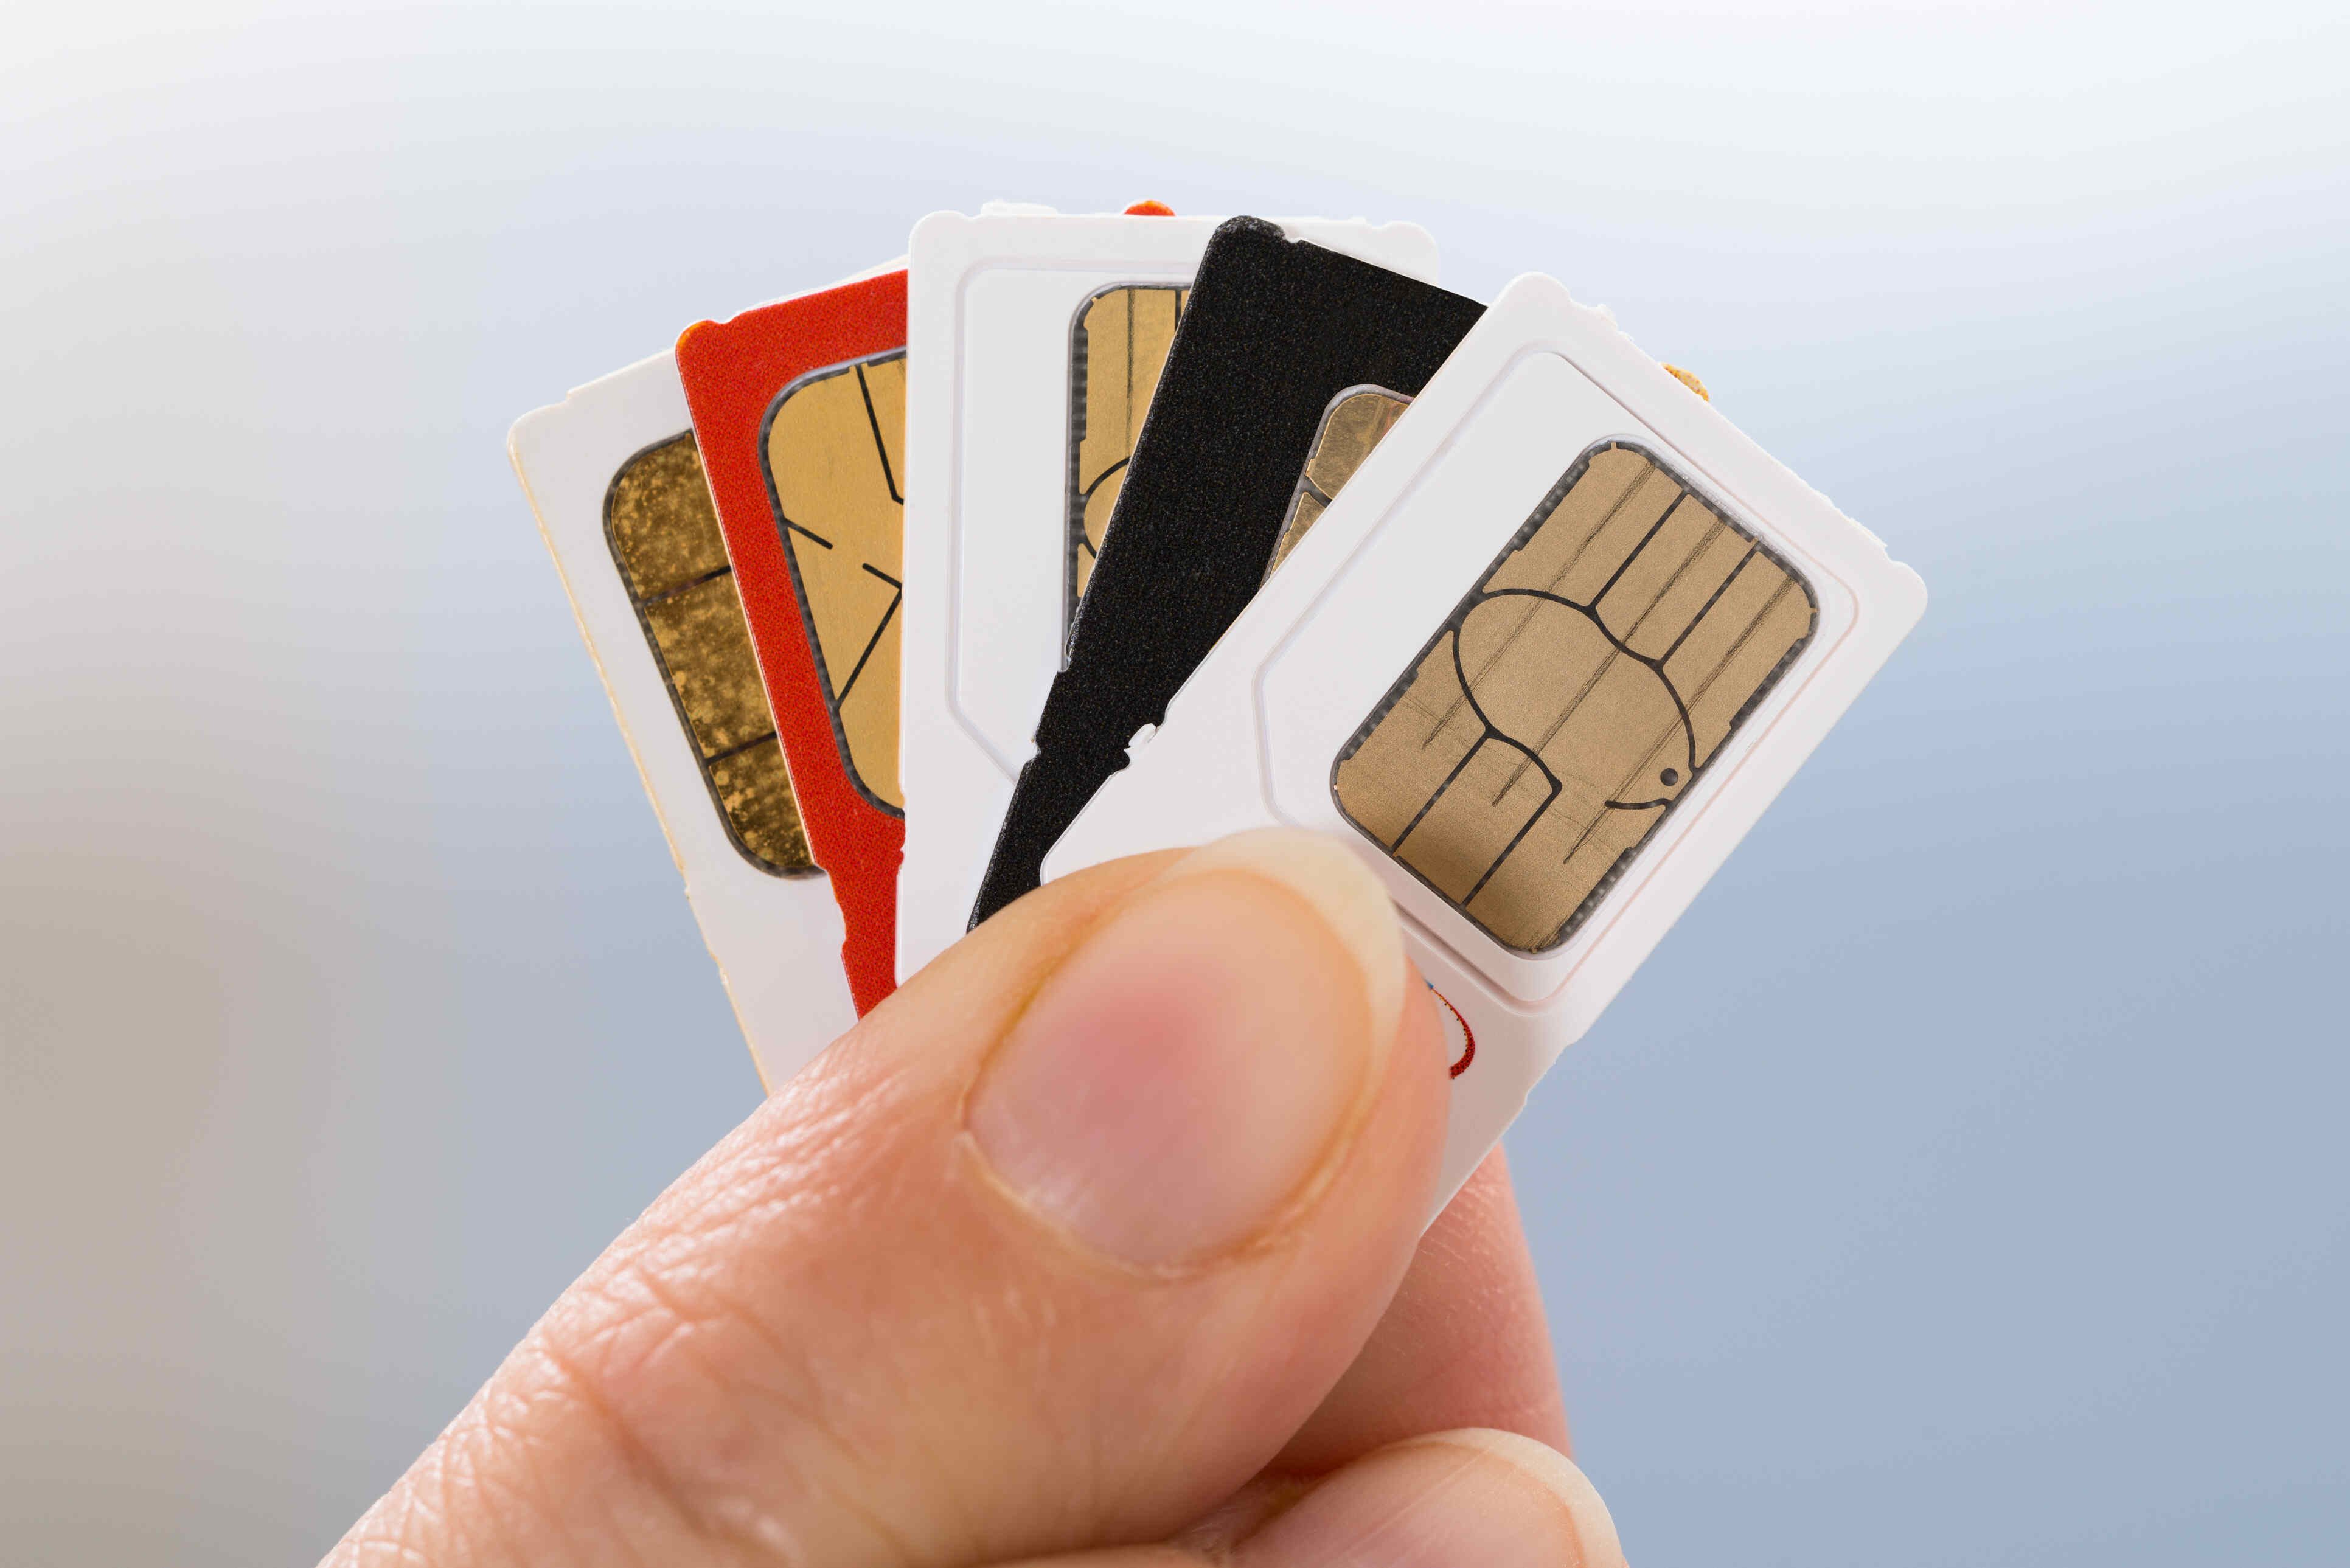 Switching Carriers: Do You Need A New SIM Card?